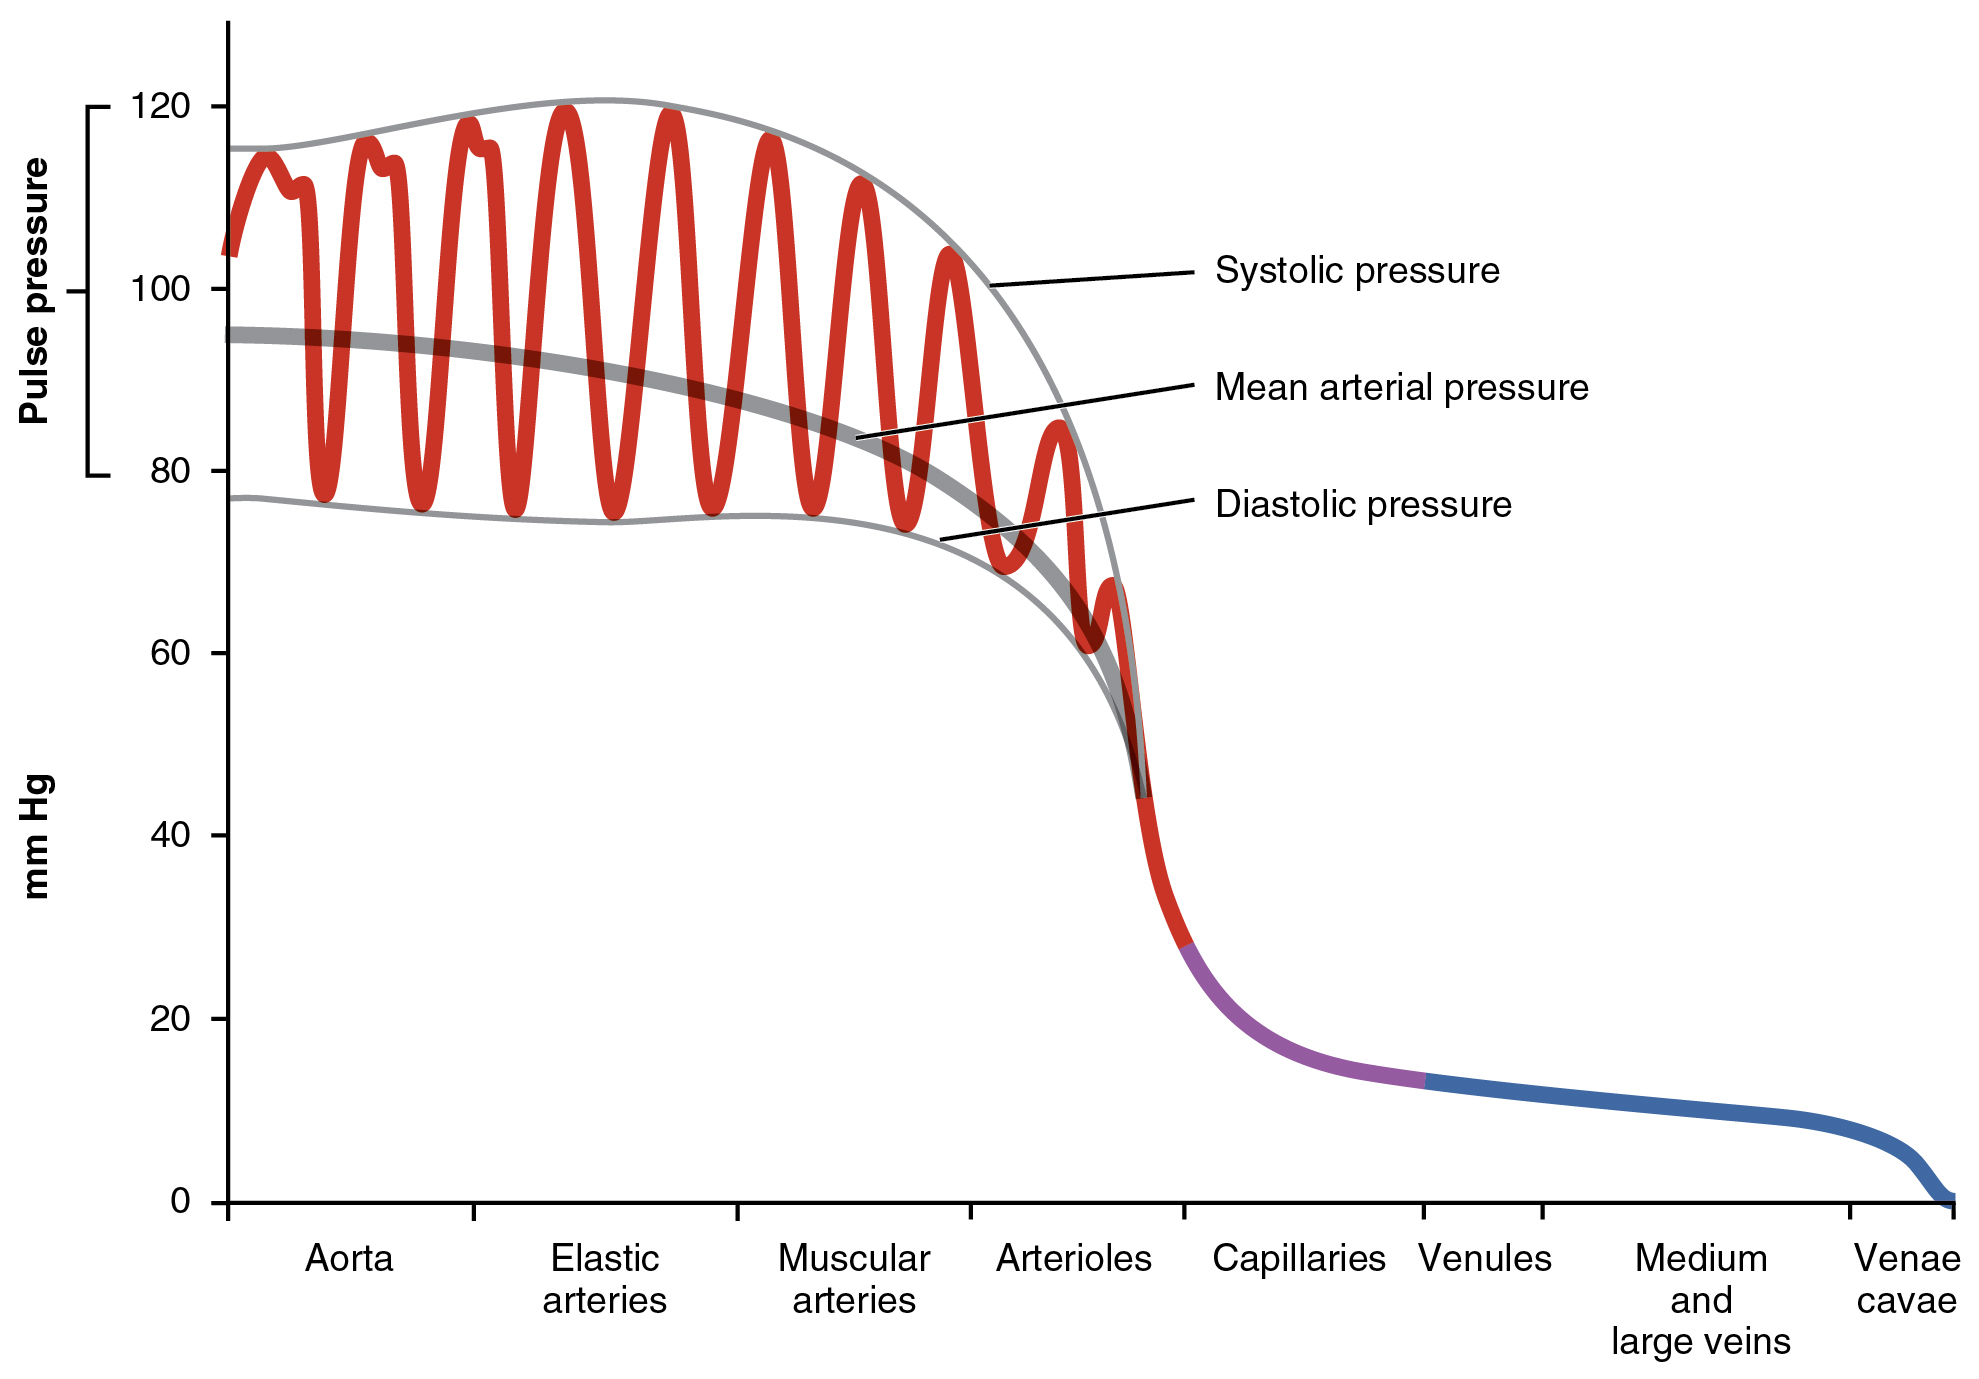 This graph shows the value of pulse pressure in different types of blood vessels.